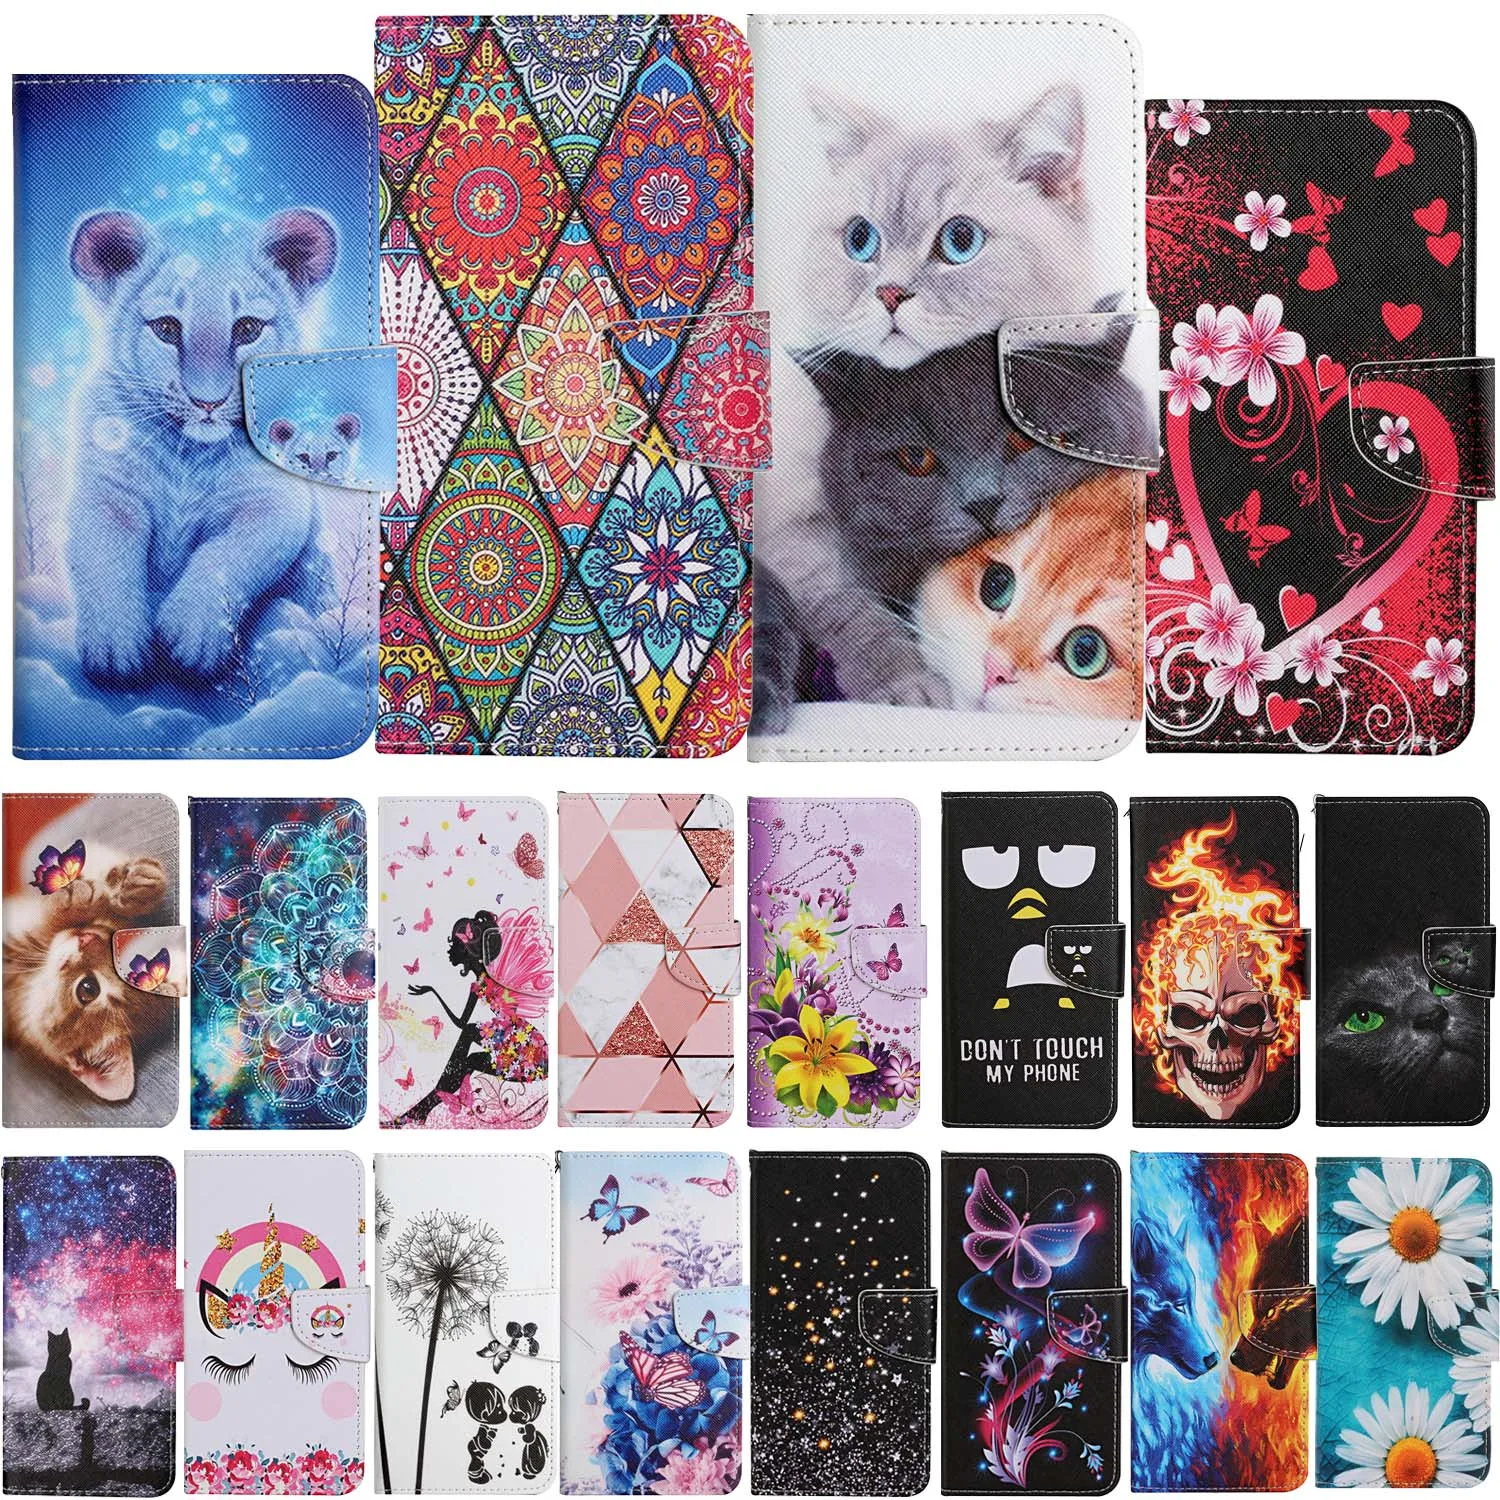 

Cute Flower Cat Painted Case For Samsung Galaxy A10 A20 A30 A40 A50 A70 A11 A21 A21S A31 A41 A51 A71 Leather Flip Wallet Cover